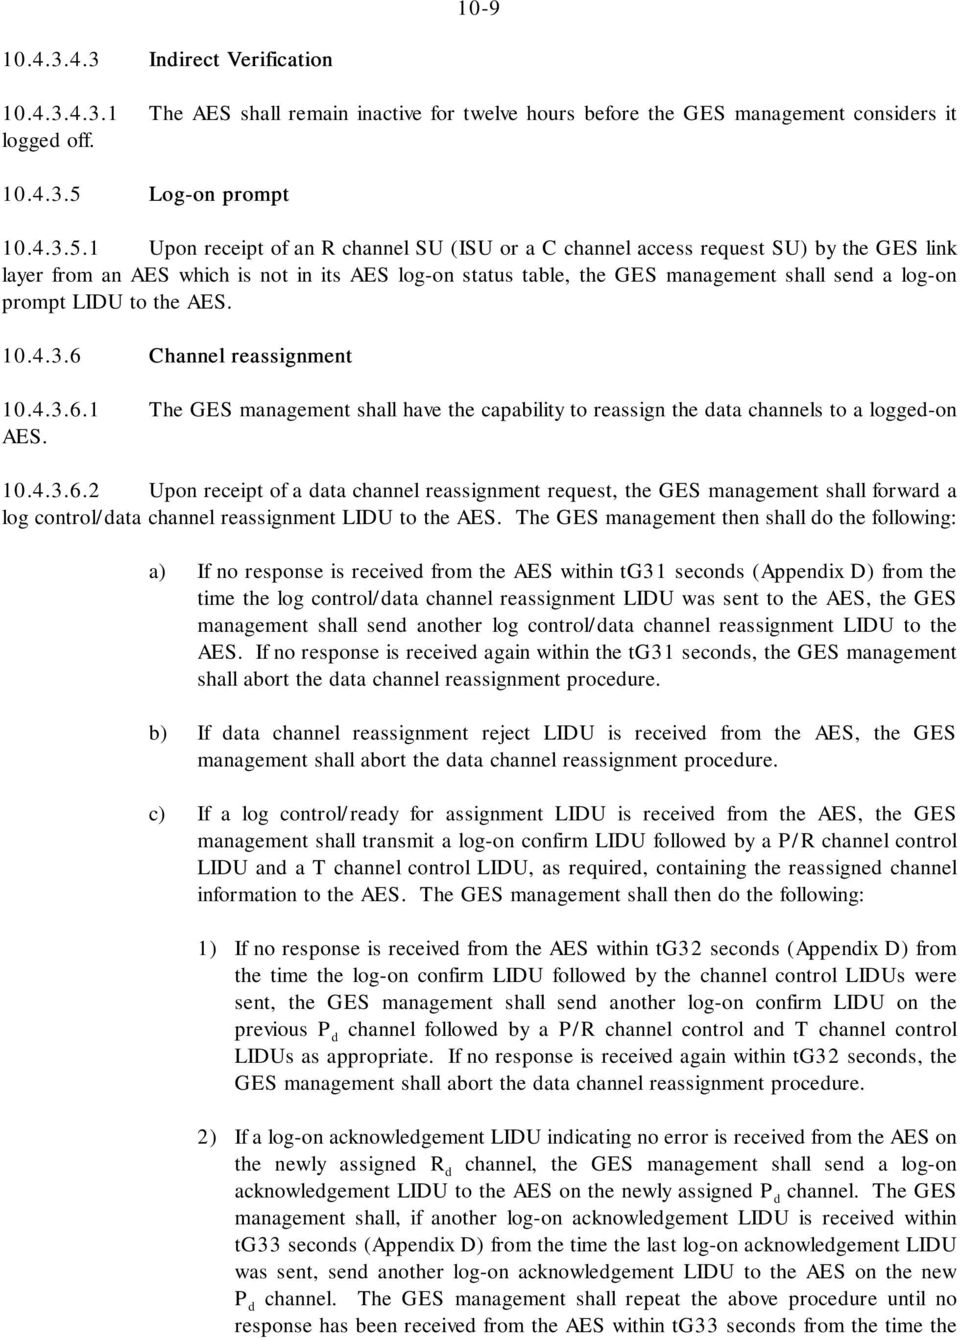 1 Upon receipt of an R channel SU (ISU or a C channel access request SU) by the GES link layer from an AES which is not in its AES log-on status table, the GES management shall send a log-on prompt